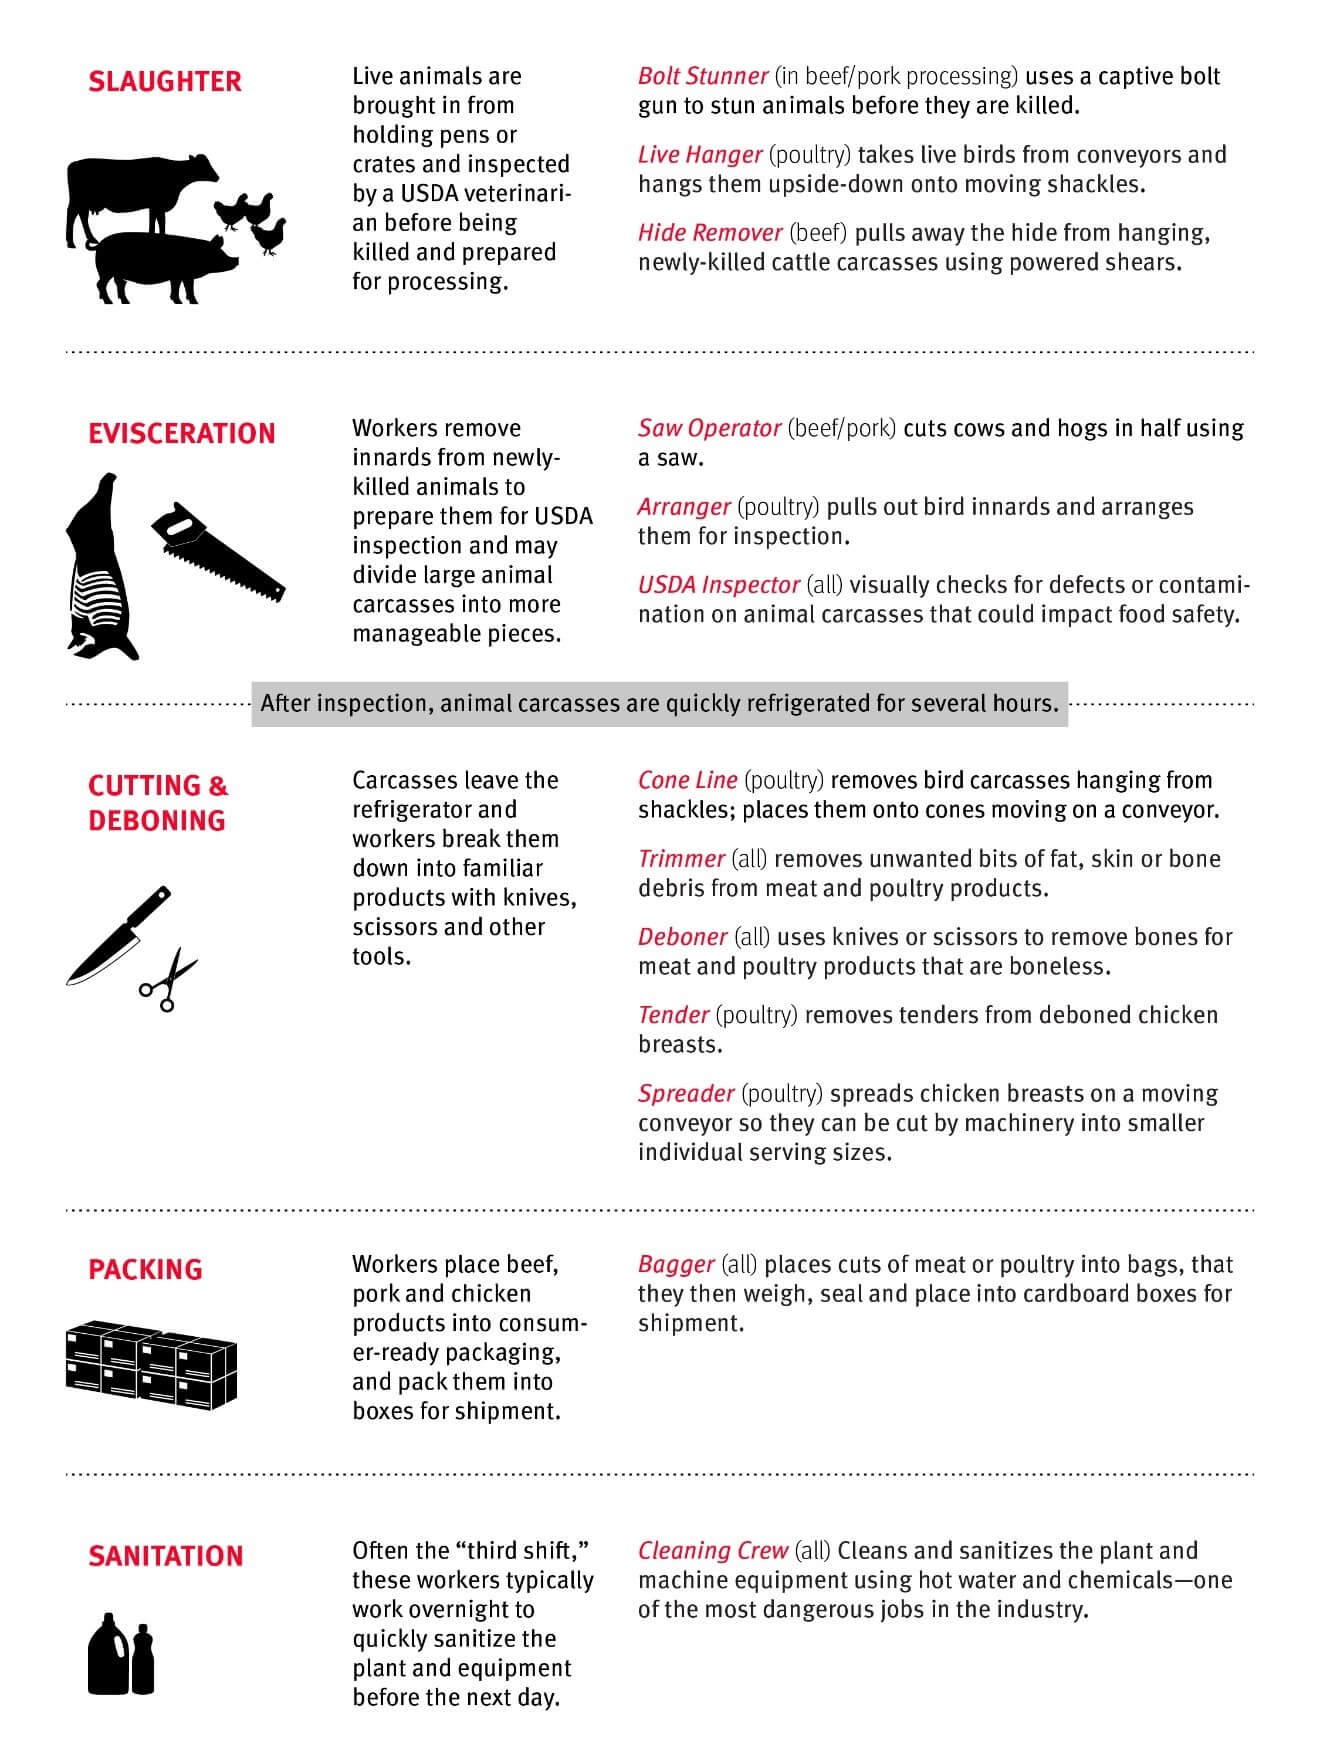 Infographic of the jobs required to turn live animals into food on the grocery store shelves